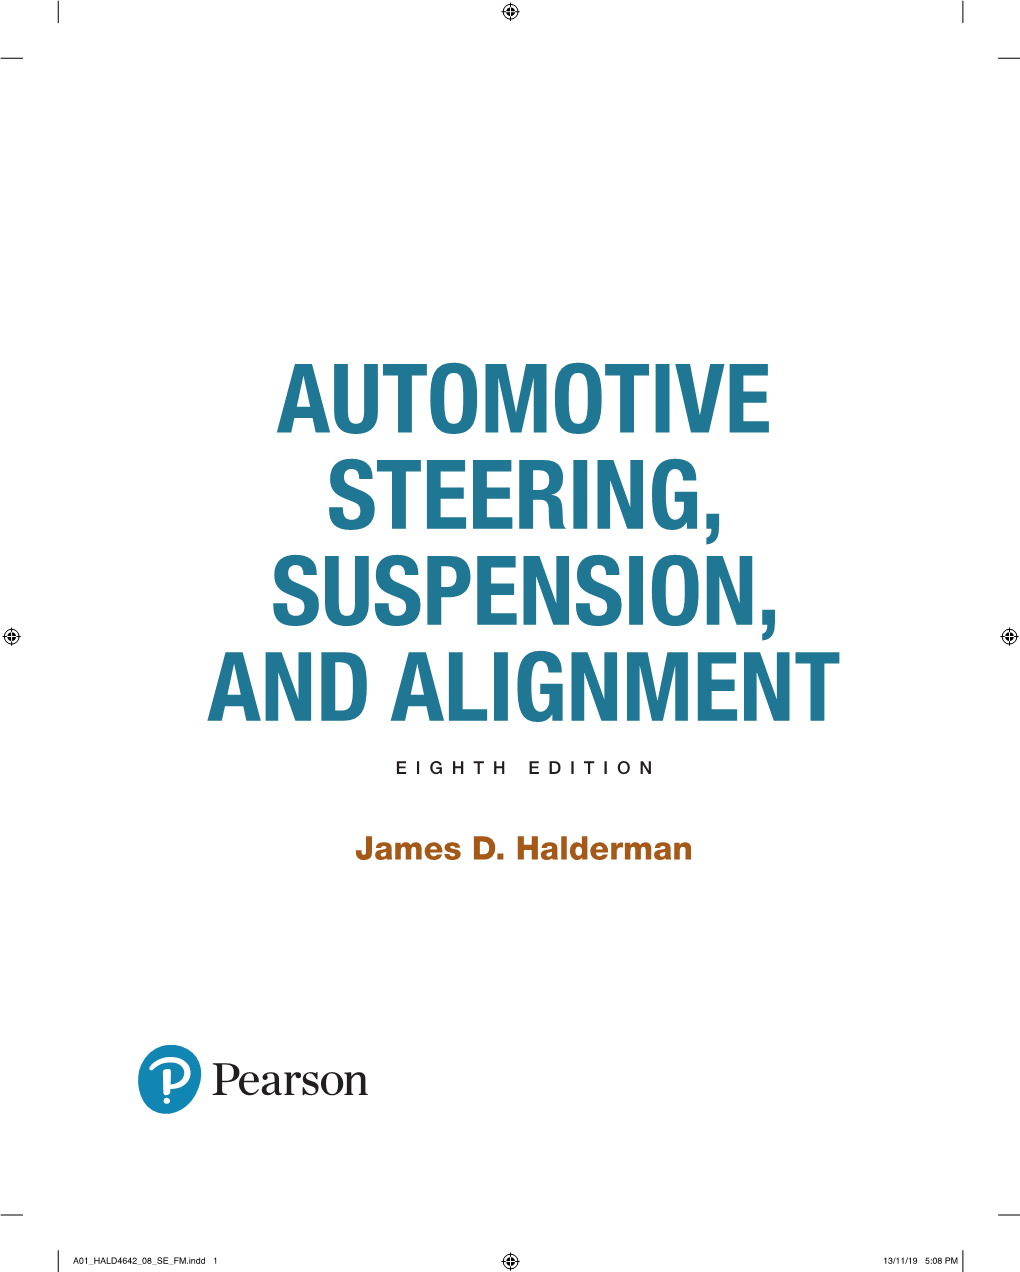 Automotive Steering, Suspension, and Alignment Eighth Edition